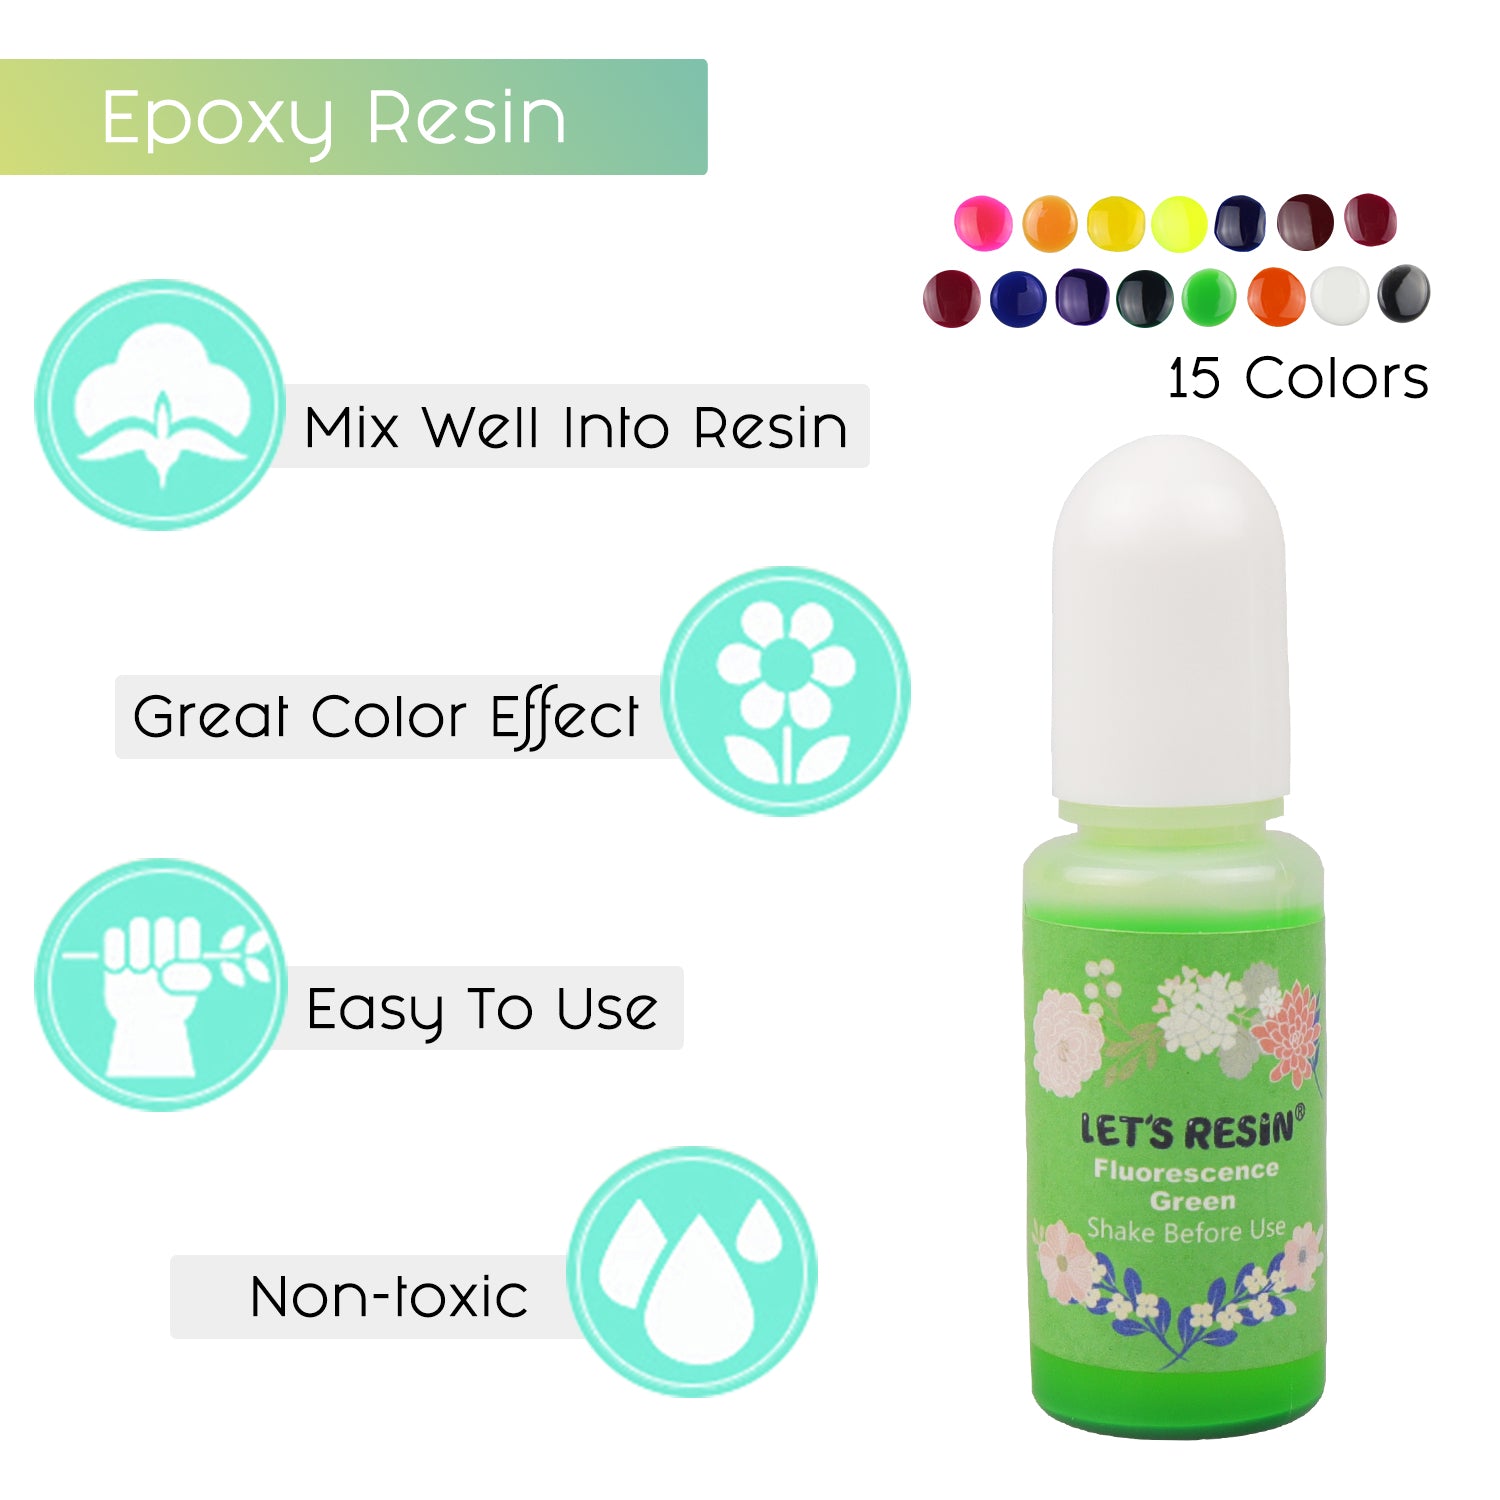 Let's Resin Opaque Resin Pigment,10 Colors Epoxy Resin Pigment Paste Each 0.35oz,High Pigmented Resin Coloring Paste,Resin Colorant for Epoxy Resin